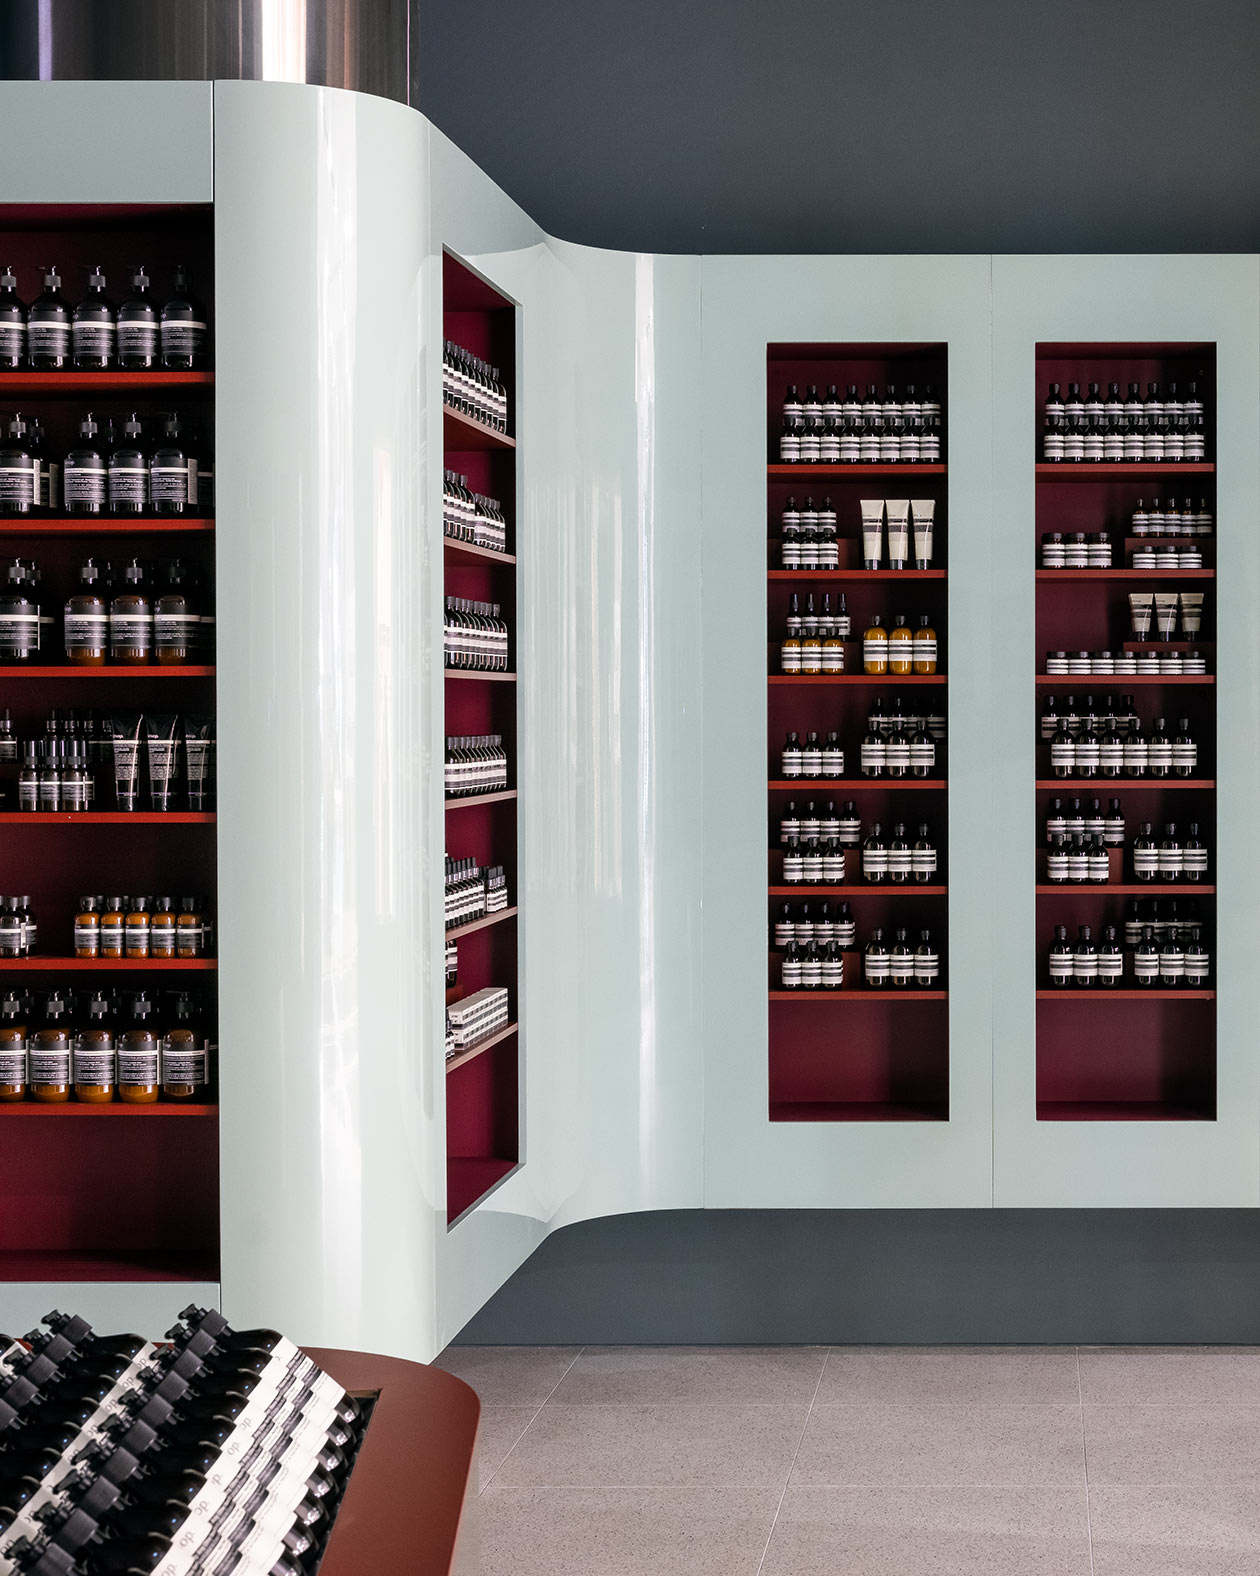 Several rows of red shelves in light blue walls displaying Aesop products.